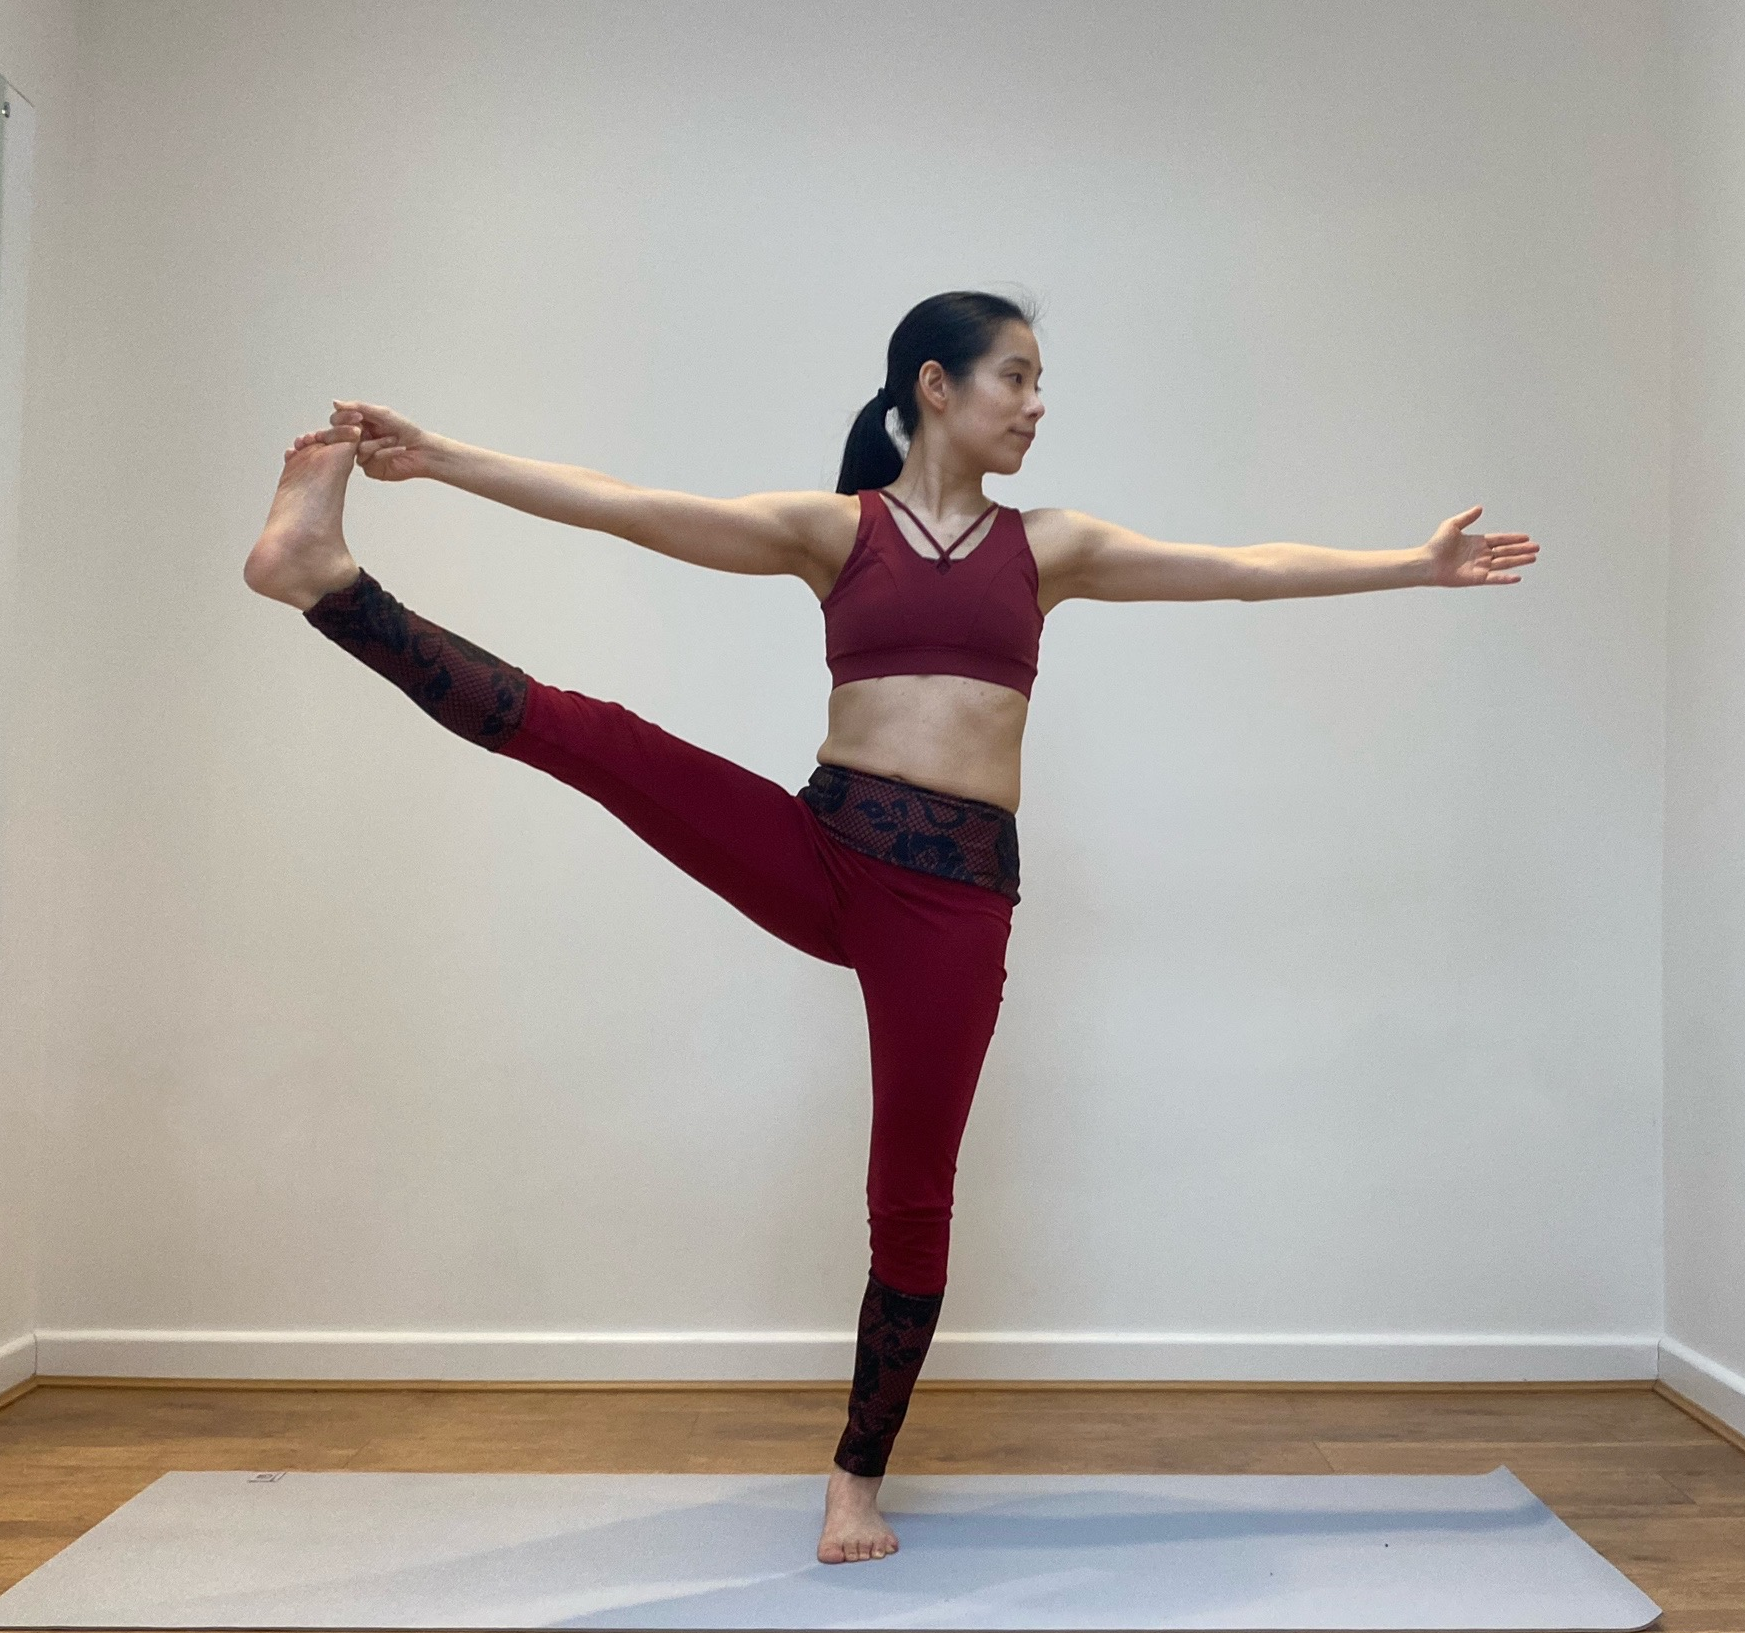 Yoga Mind Balance offers yoga classes, 1-1 Private Yoga sessions and Workshops in South Woodford E18